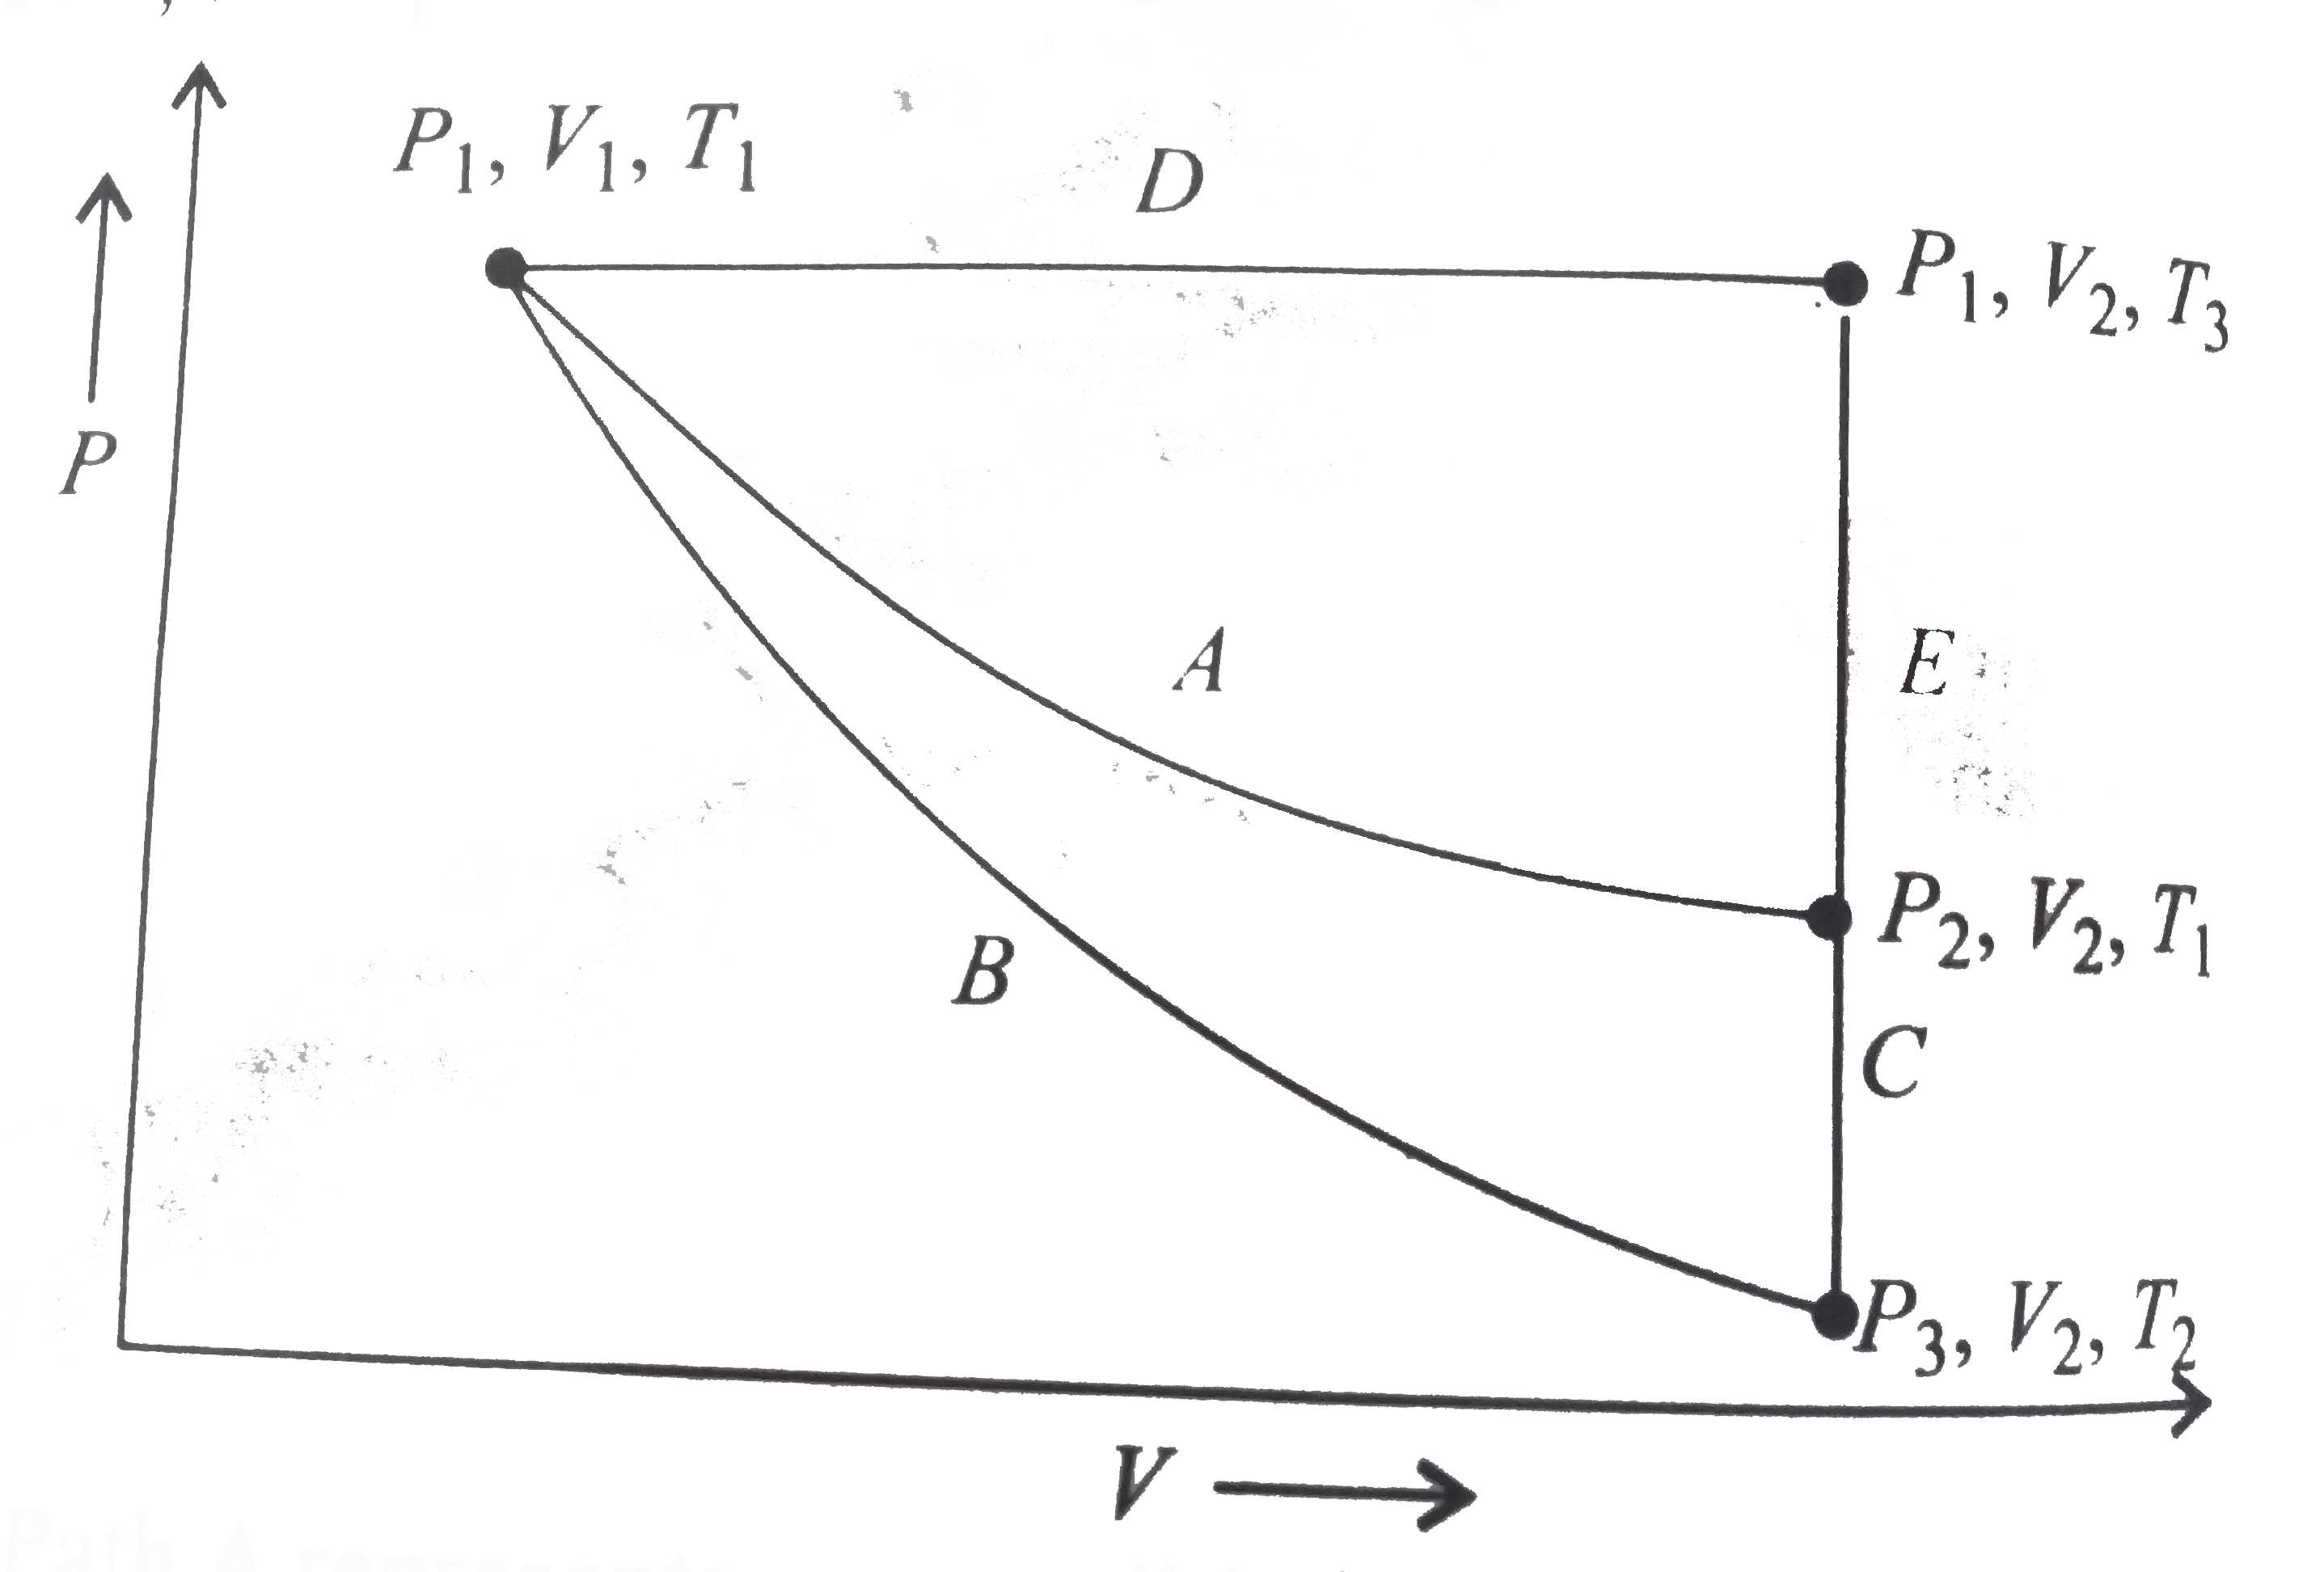 For an ideal gas, an illustration of three different paths A(B+C) and (D+E) from an initial state P(1), V(1), T(1) to a final state P(2), V(2),T(1) is shown in the given figure.      Path A represents a reversible isothermal expansion form P(1),V(1) to P(2),V(2), Path (B+C) represents a reversible adiabatic expansion (B) from P(1),V(1),T(1)to P(3),V(2),T(2) followed by reversible heating the gas at constant volume (C)from P(3),V(2),T(2) to P(2),V(2),T(1). Path (D+E) represents a reversible expansion at constant pressure P(1)(D) from P(1),V(1),T(1) to P(1),V(2),T(3) followed  by a reversible cooling at constant volume V(2)(E) from P(1),V(2),T(3) to P(2),V(2),T(1).   What is DeltaS for path (D +E)?